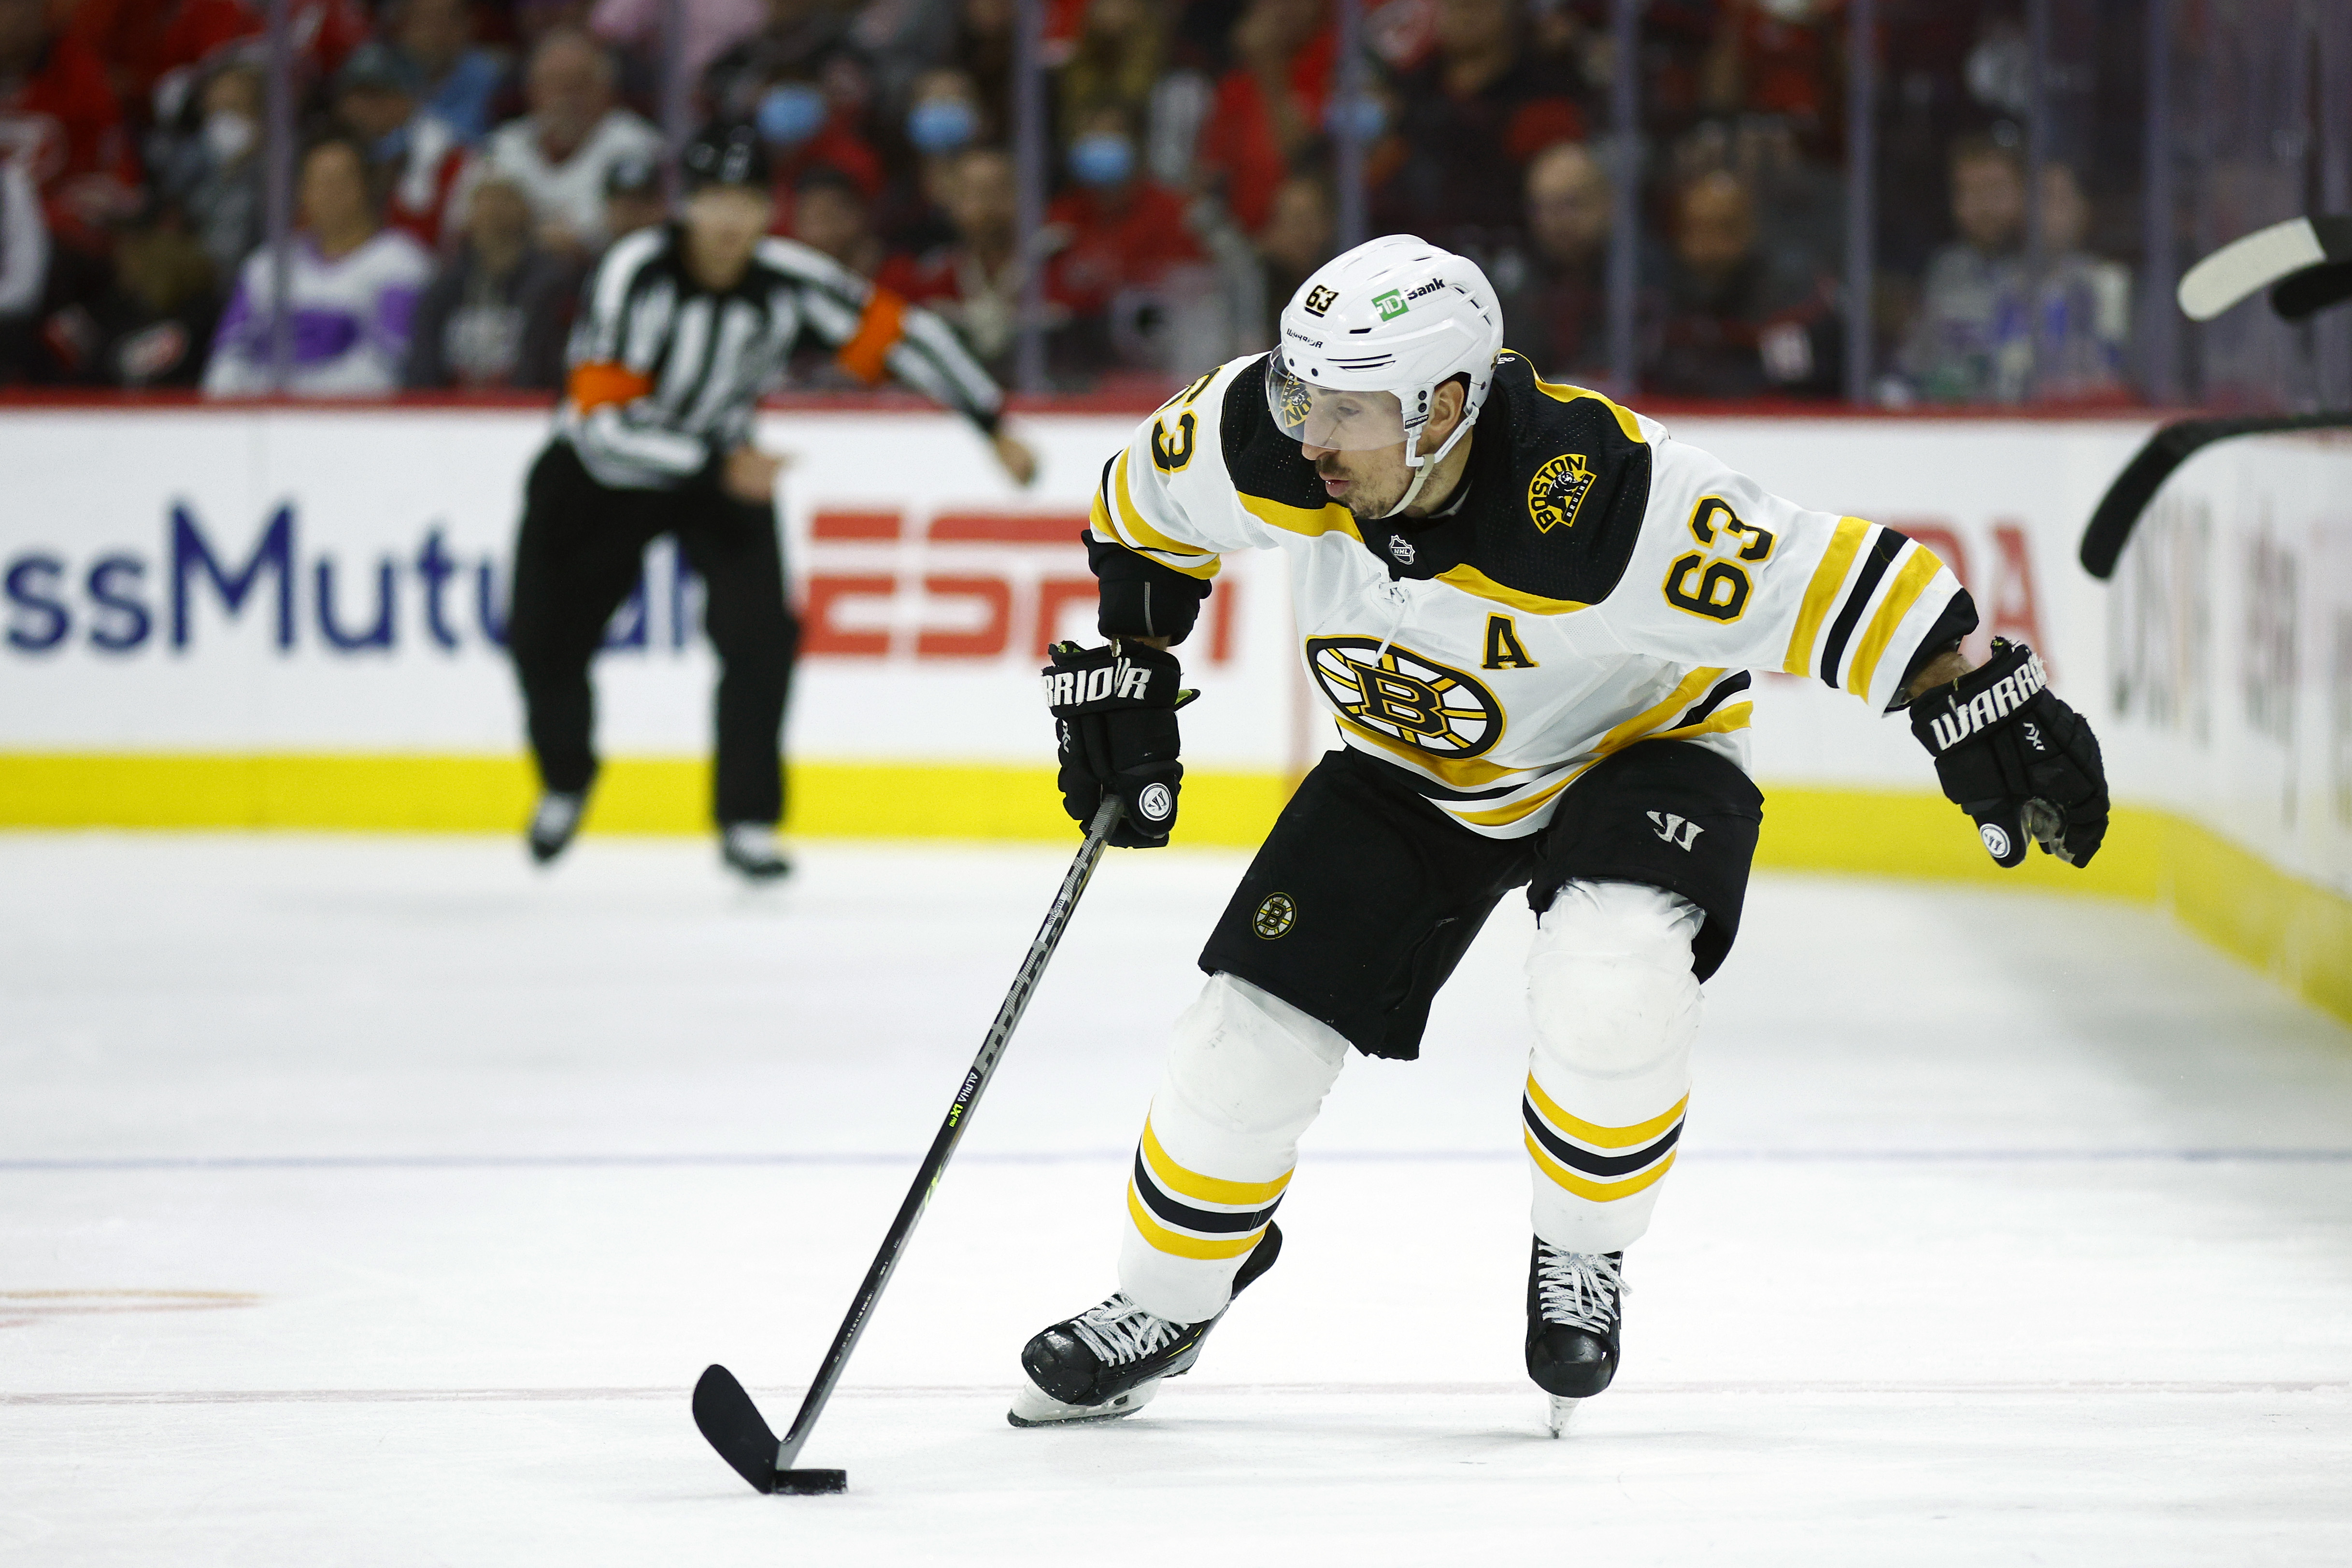 Brad Marchand of the Boston Bruins skates with the puck during the third period in Game Seven of the First Round of the 2022 Stanley Cup Playoffs against the Carolina Hurricanes at PNC Arena on May 14, 2022 in Raleigh, North Carolina.